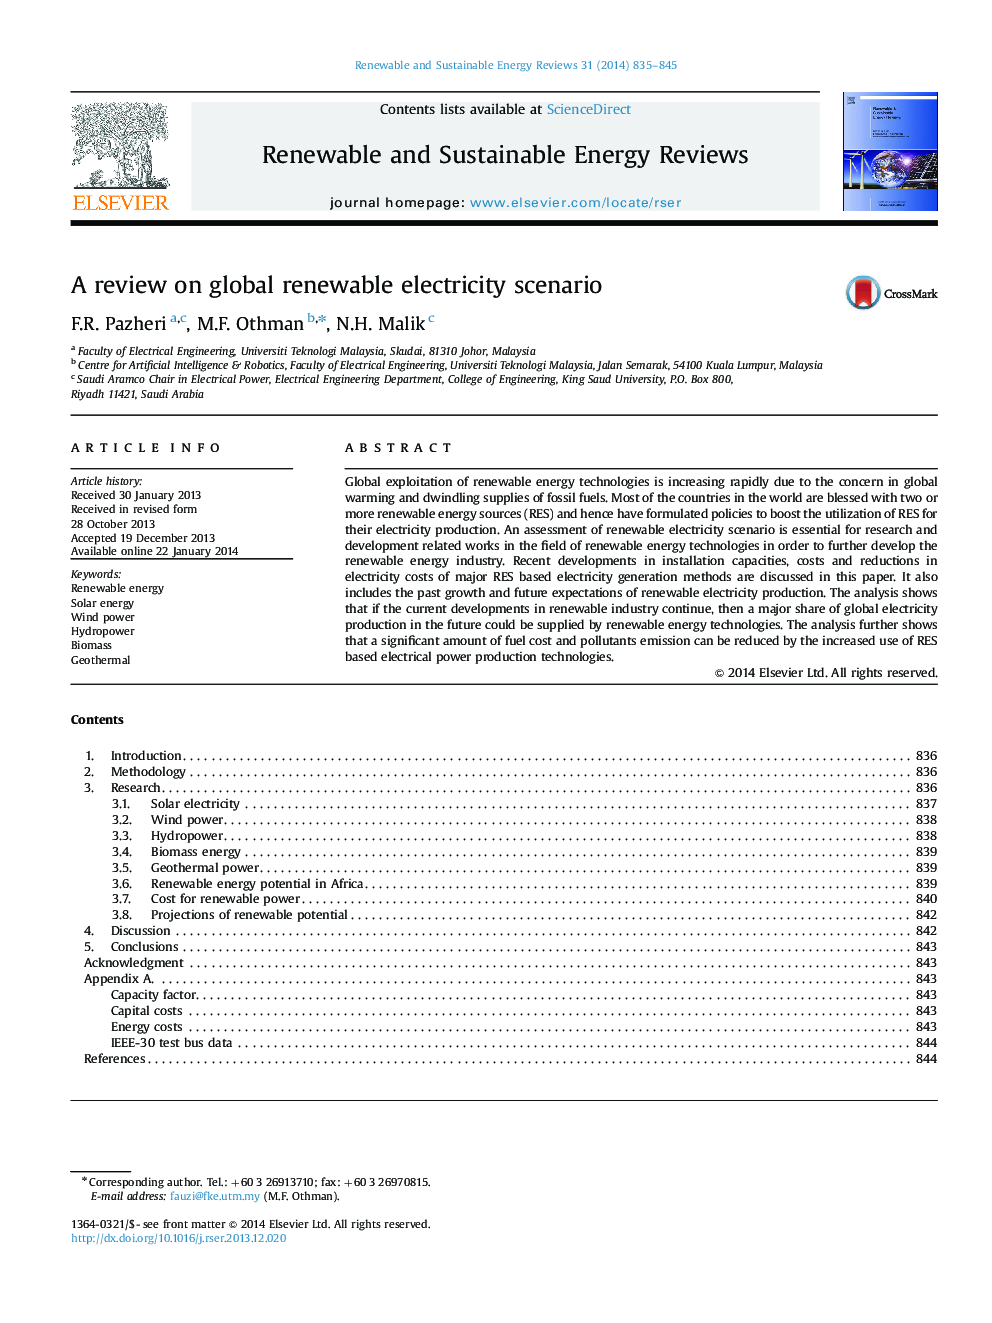 A review on global renewable electricity scenario